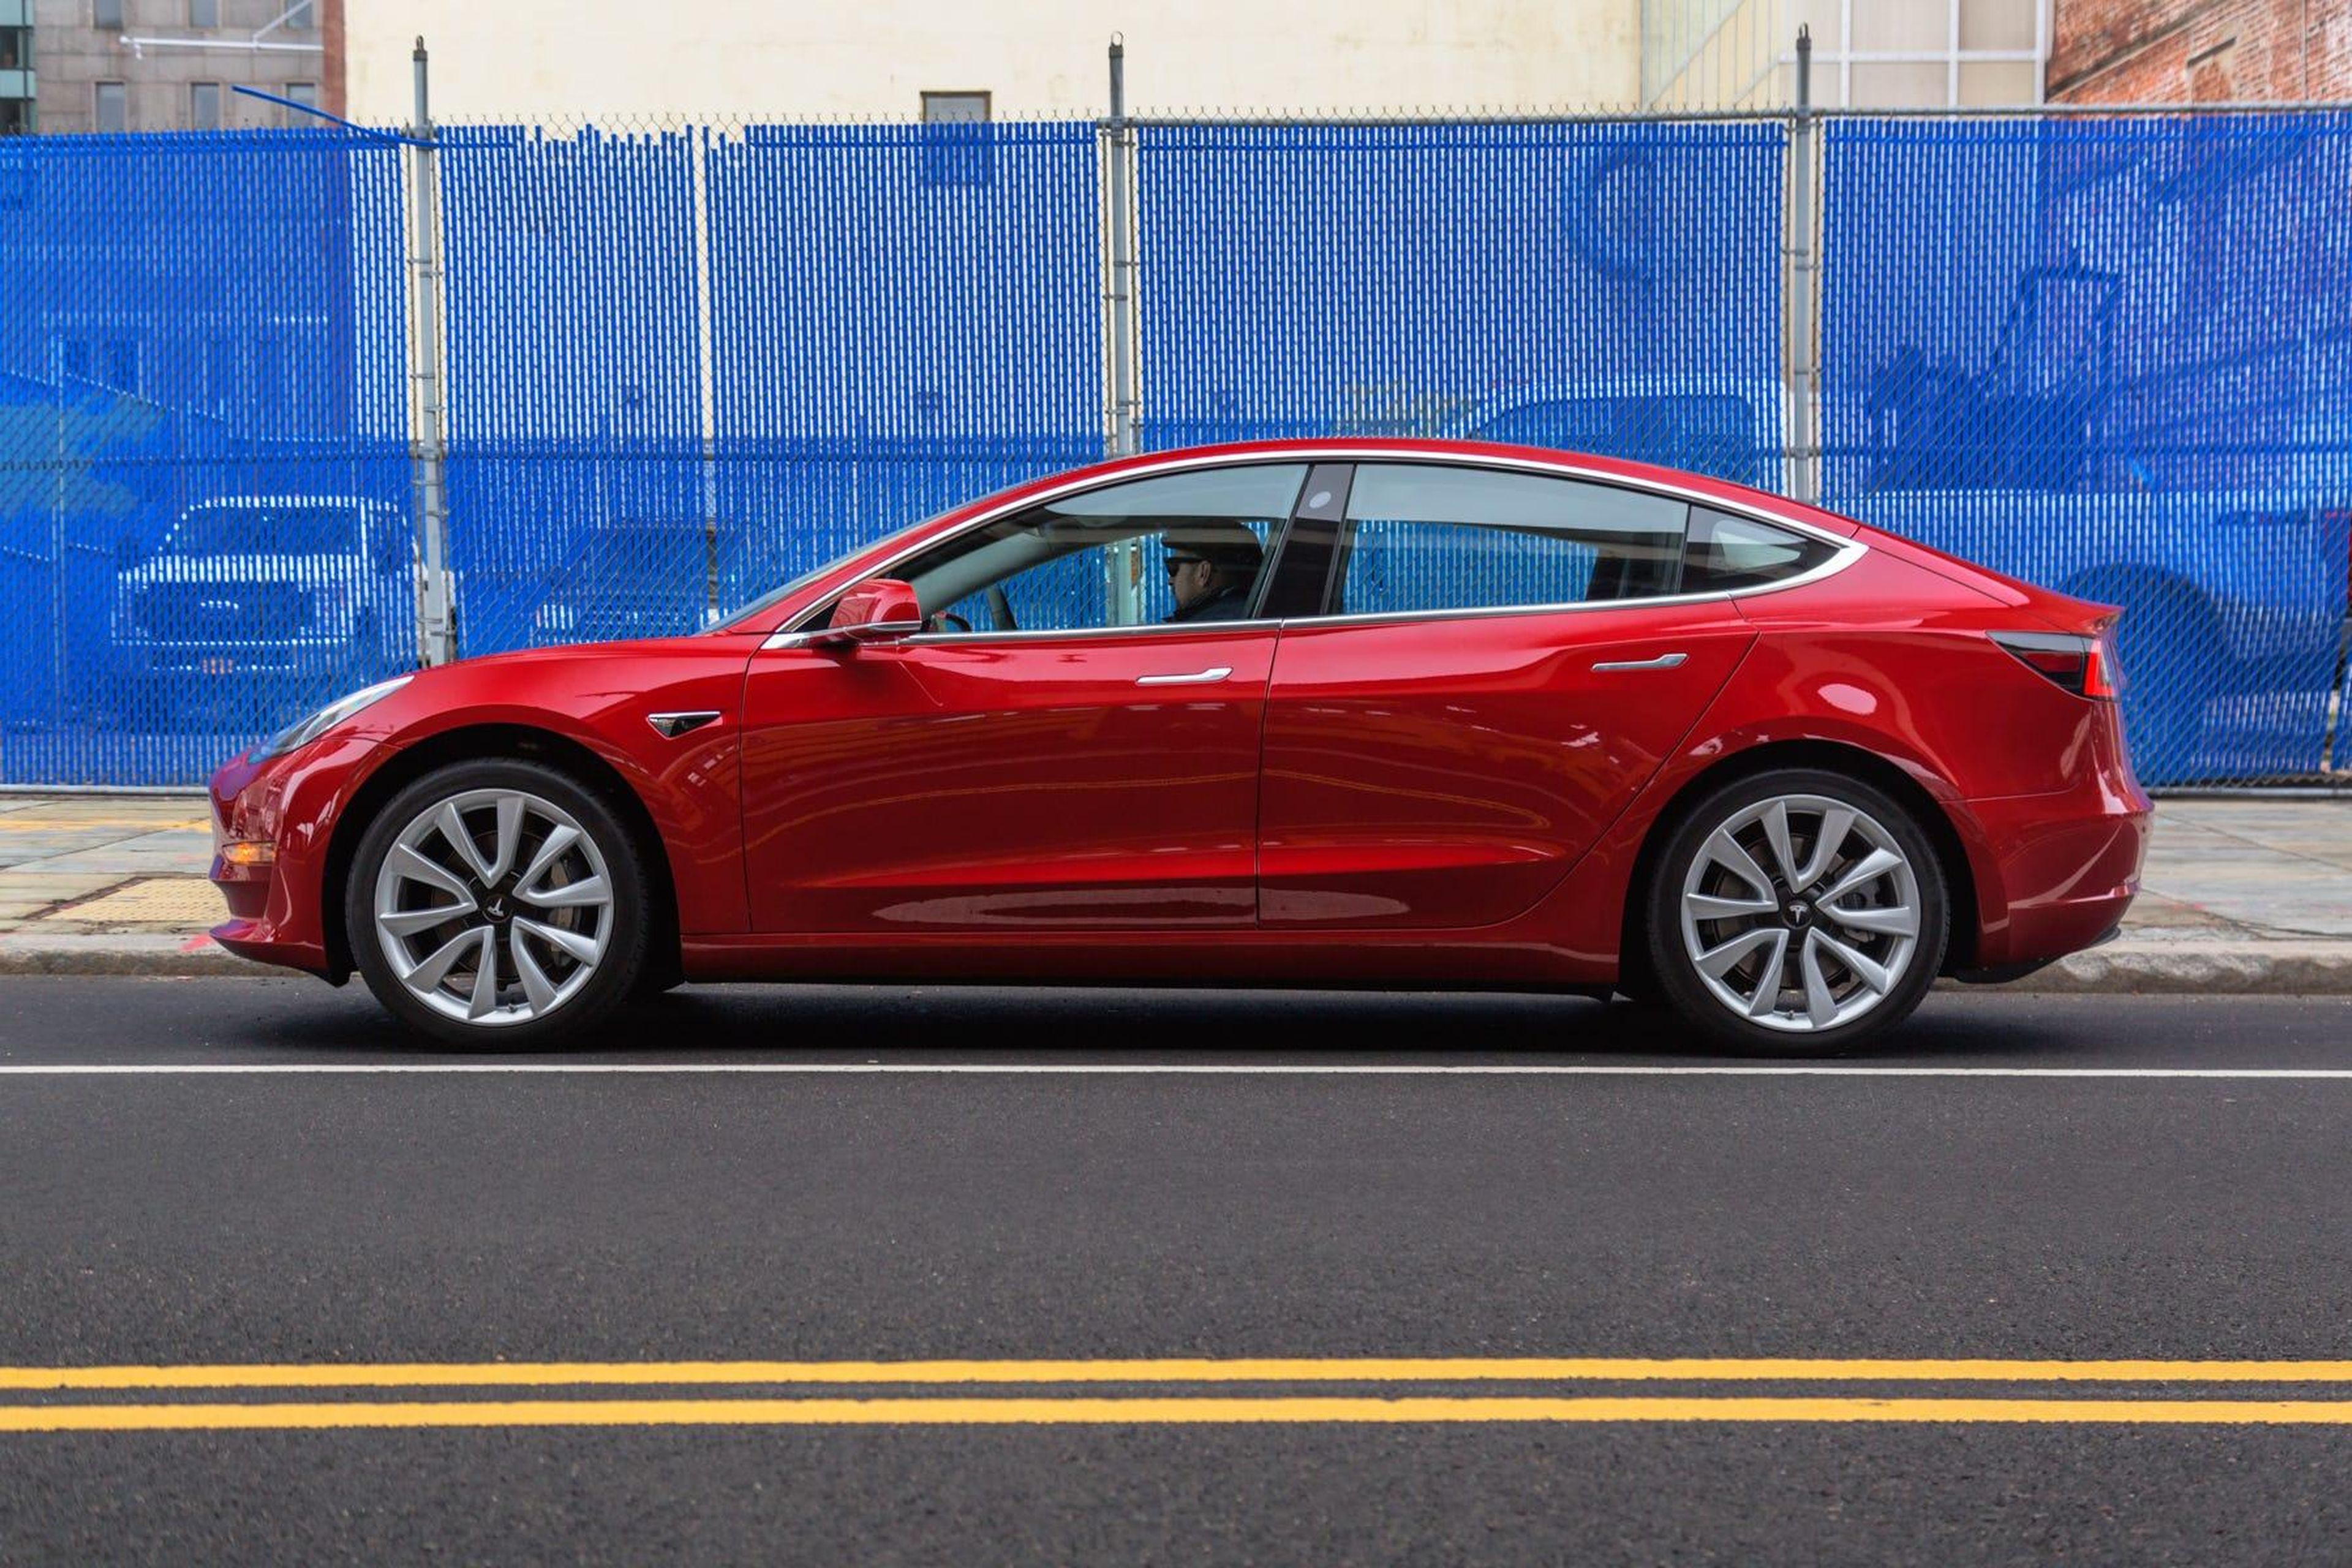 Tesla currently sells two versions of the Model 3: single-motor rear-wheel-drive and dual-motor all-wheel drive. There are the equivalent of five trim levels.